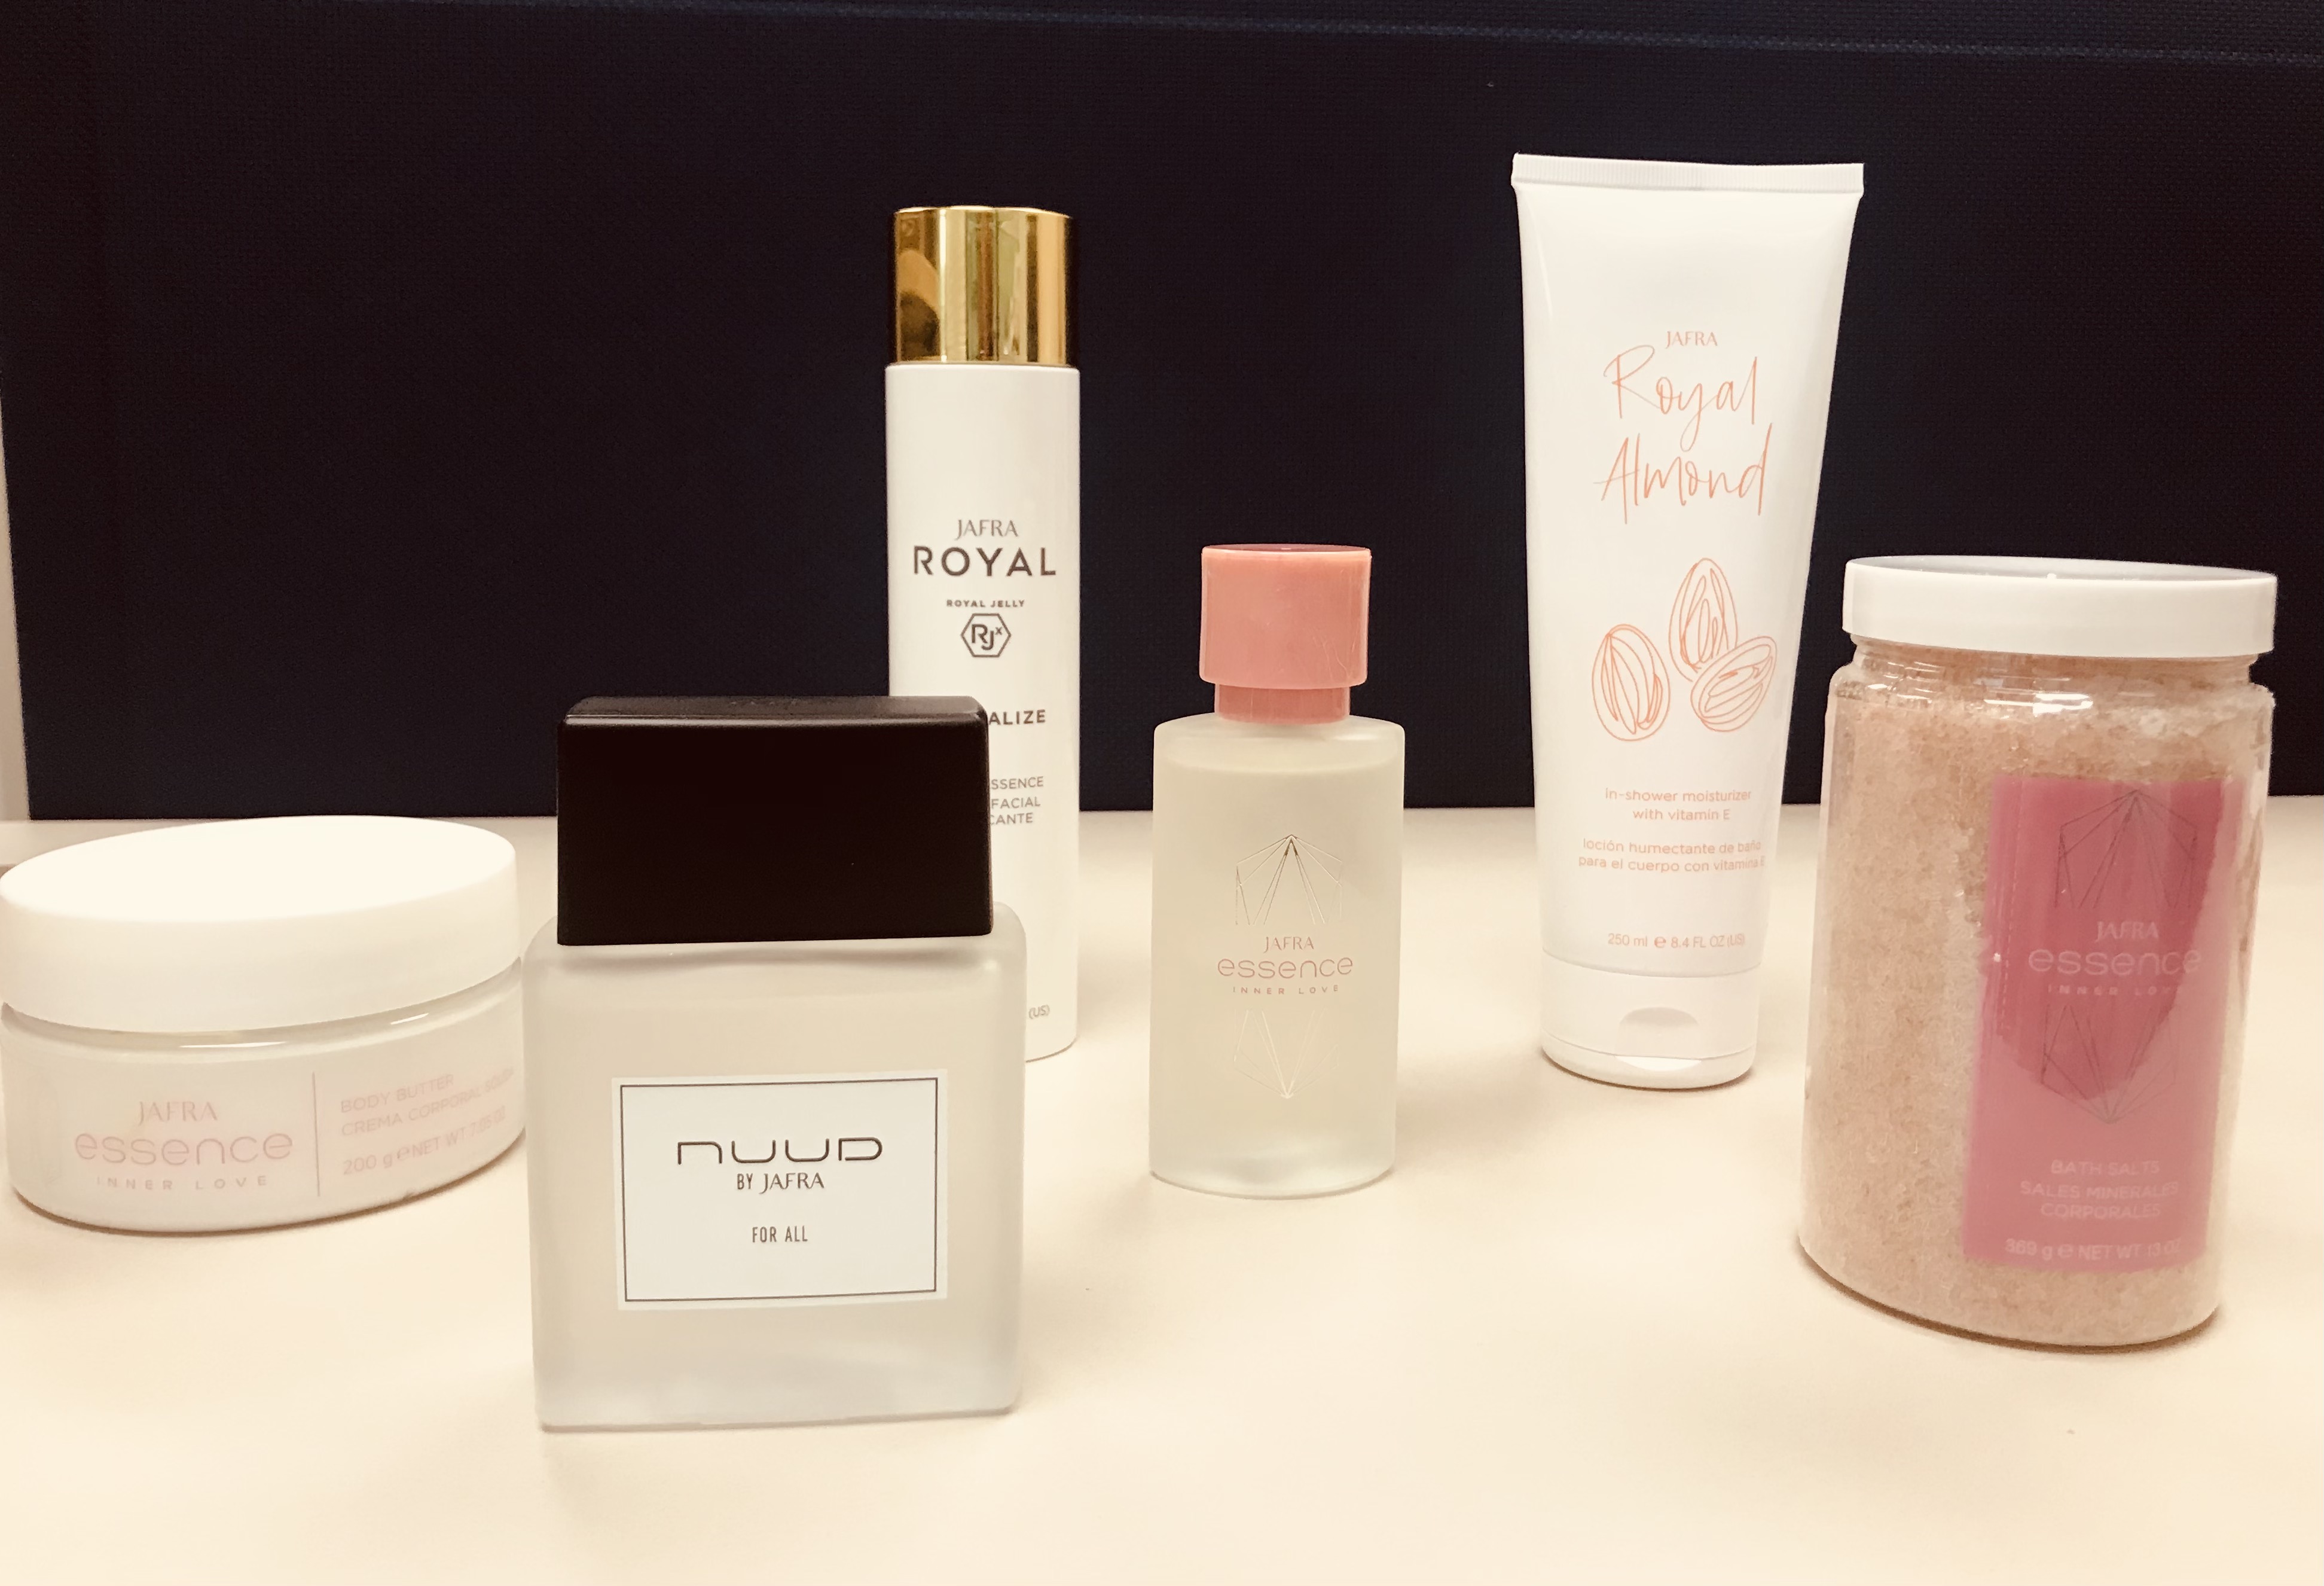 Jafra Introduces Six New Products to Skin and Fragrance Lines